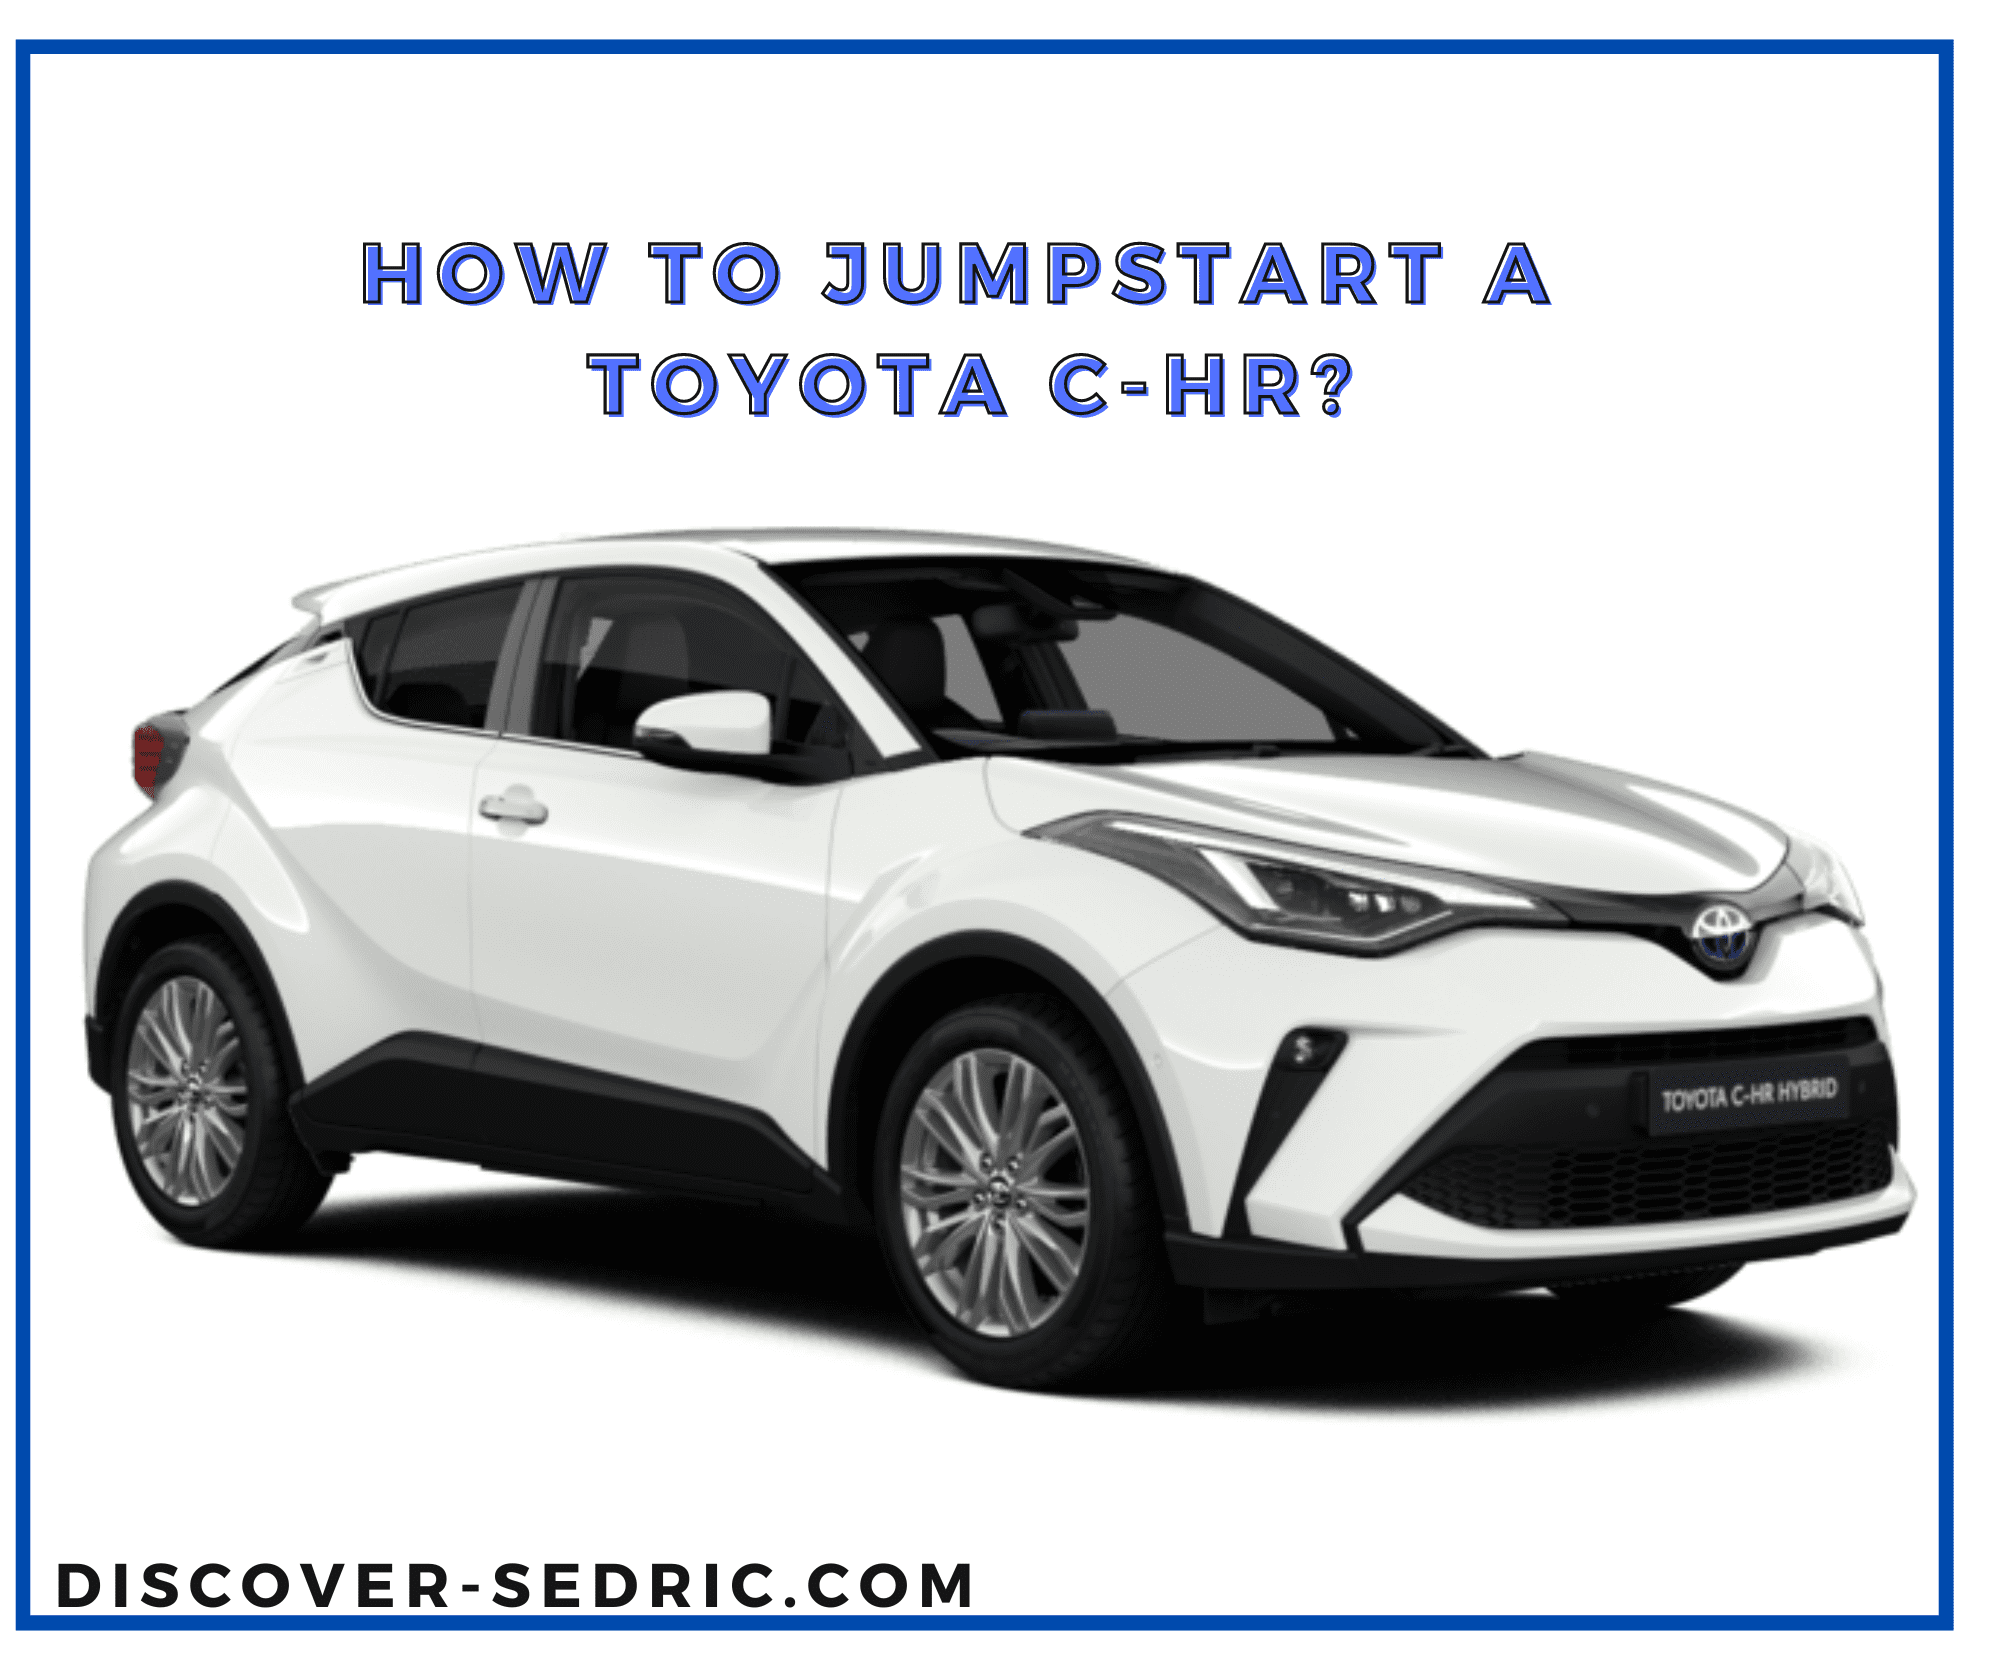 How To Jumpstart A Toyota C HR